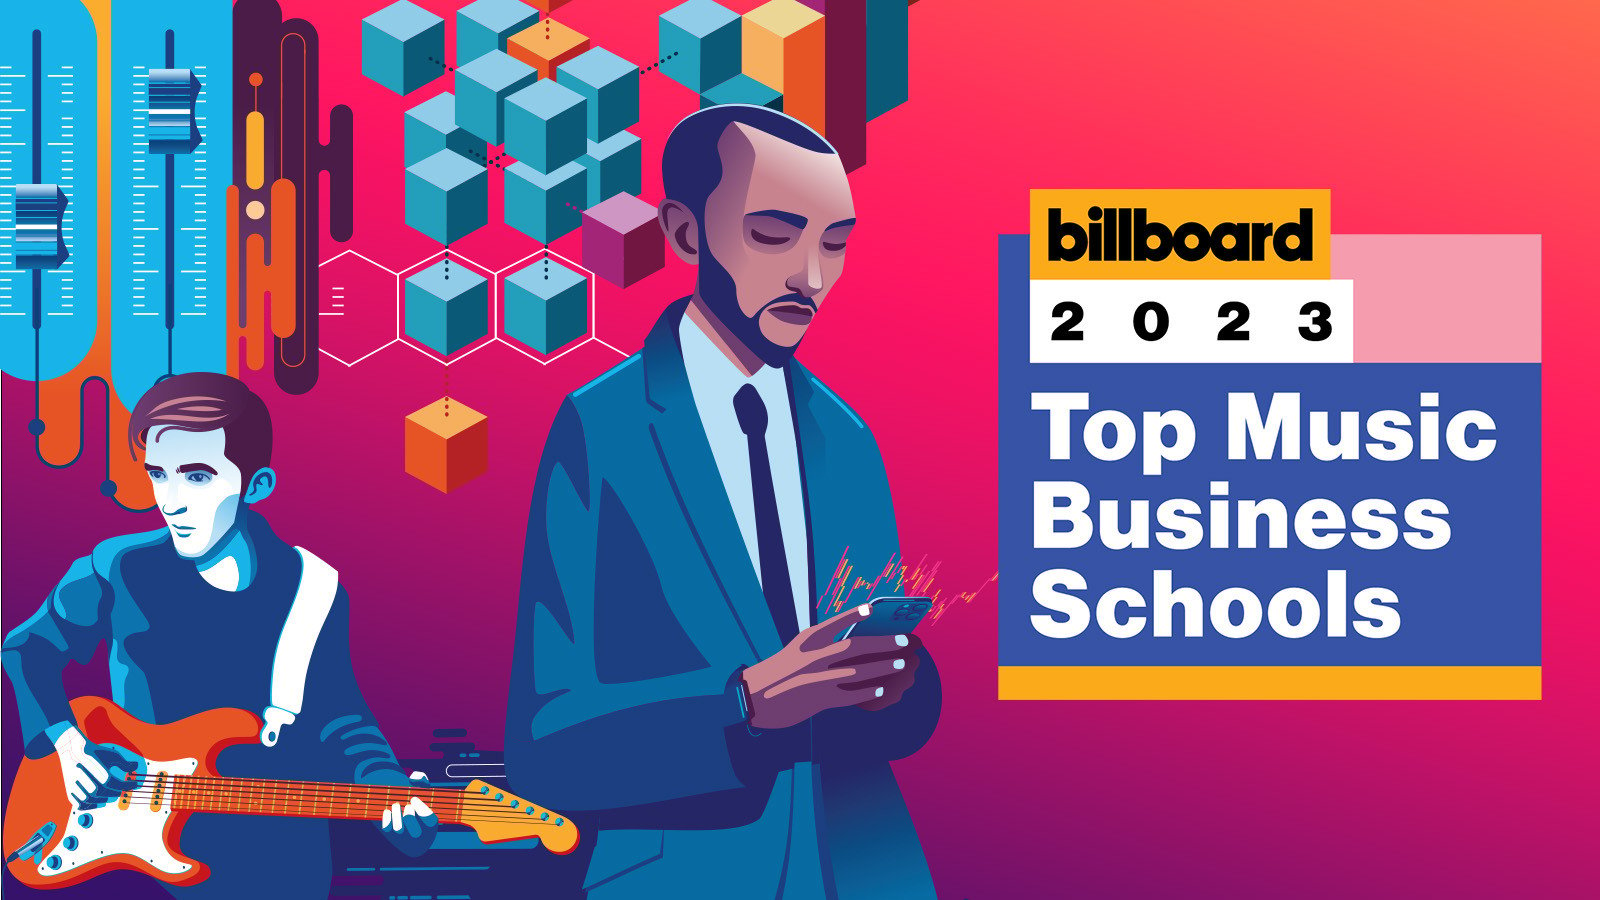 Full Sail Included on ‘Billboard’ Magazine's List of Top Music Business Schools - Hero image 